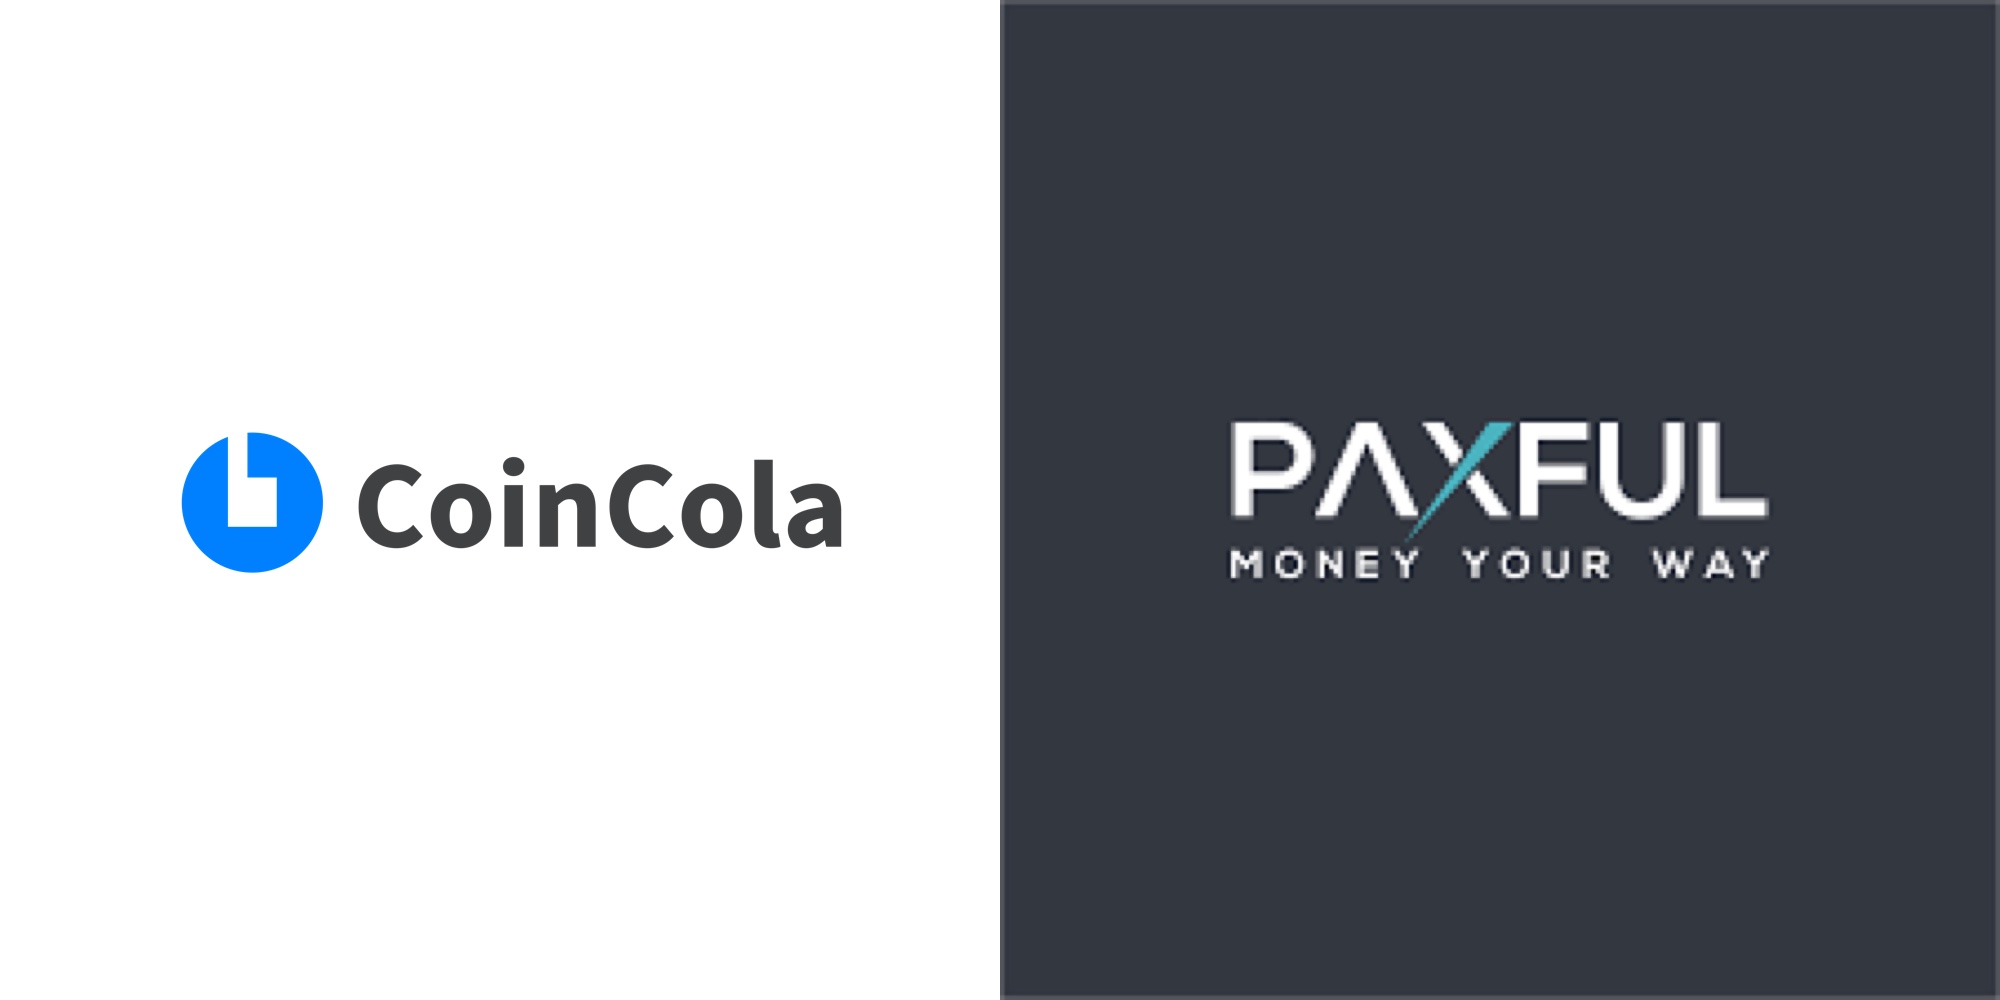 Coincola Vs Paxful Best Place To Buy Bitcoin Coincola Blog - 